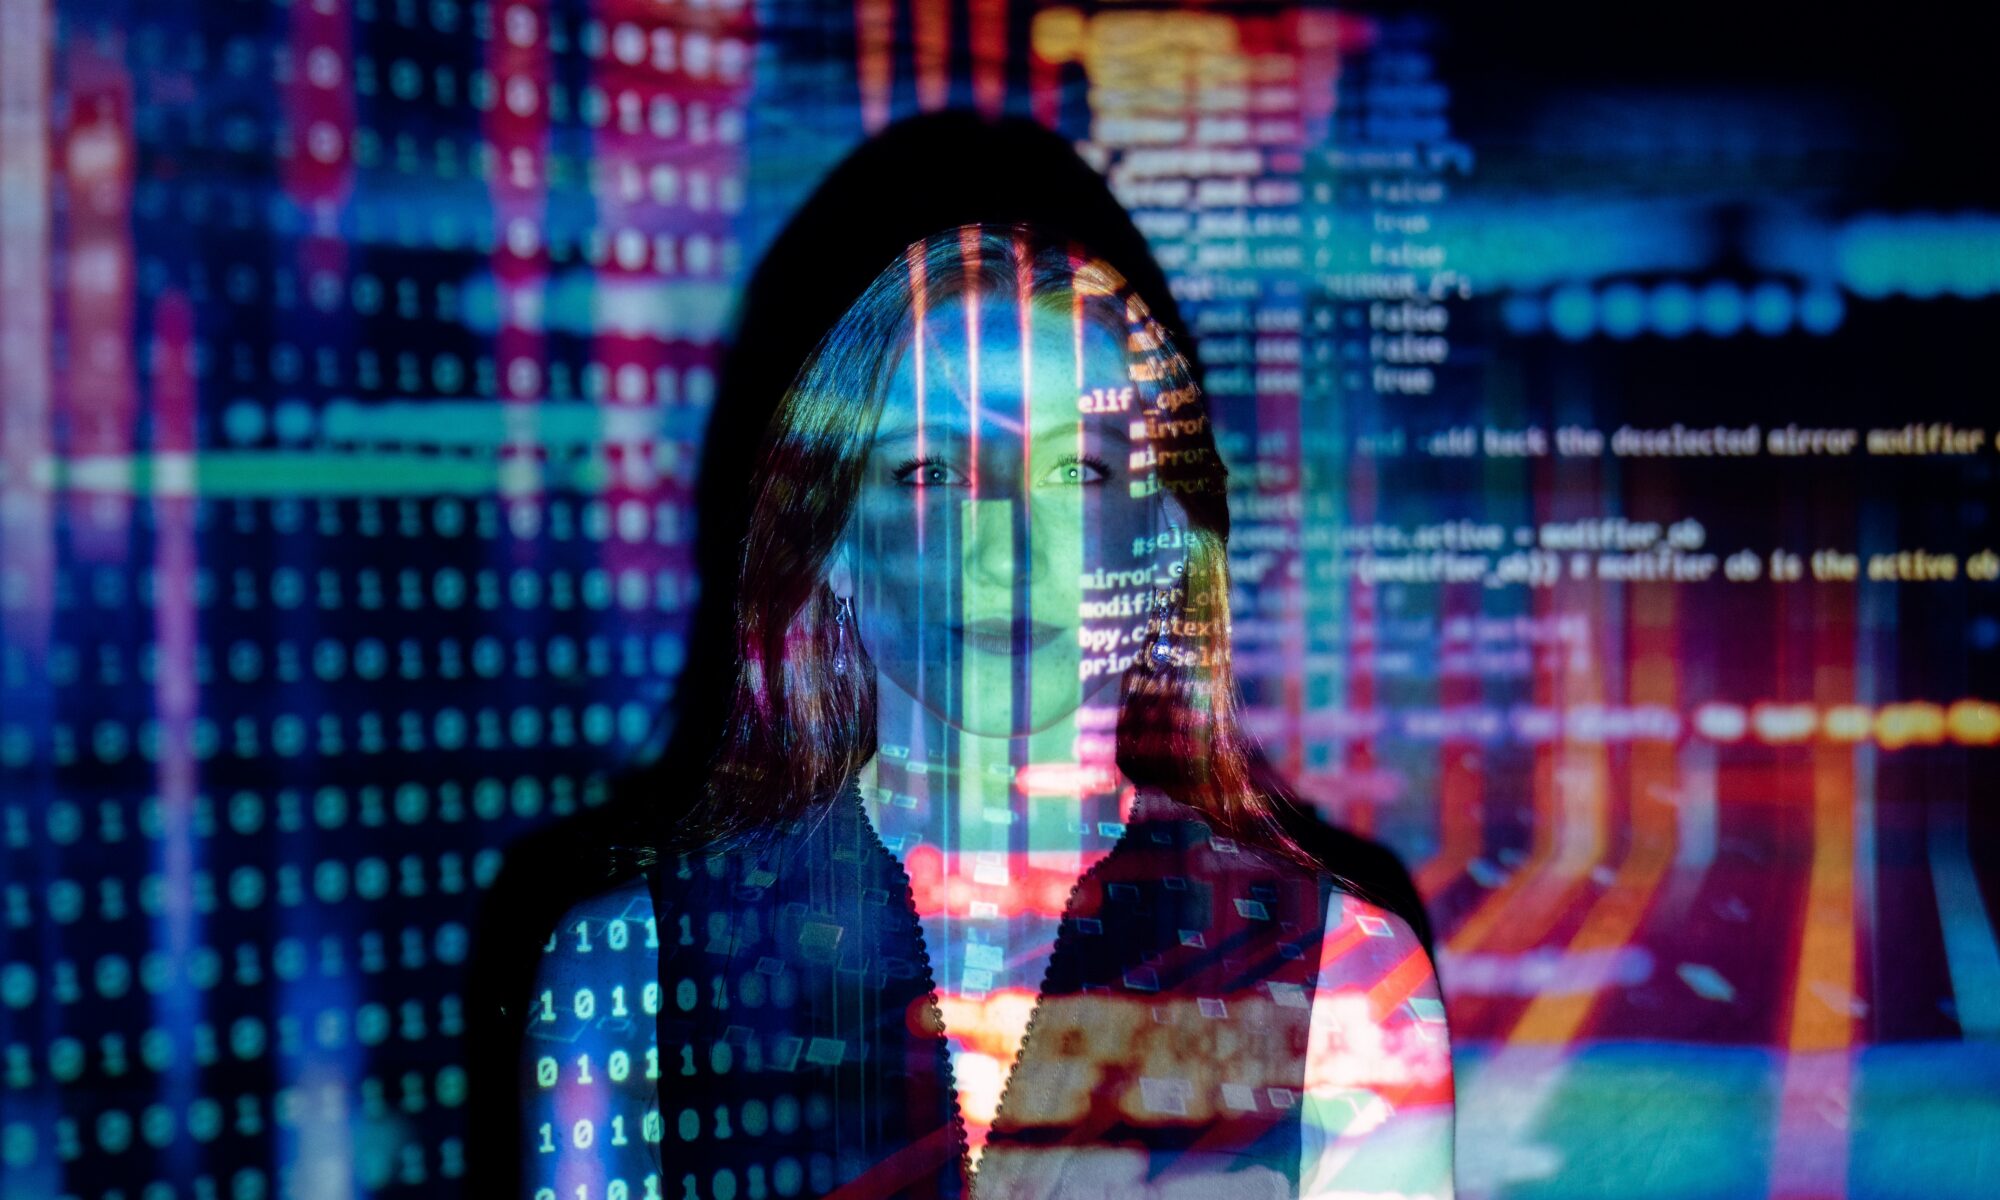 Image of woman looking at camera with numbers in a design overlaid on her